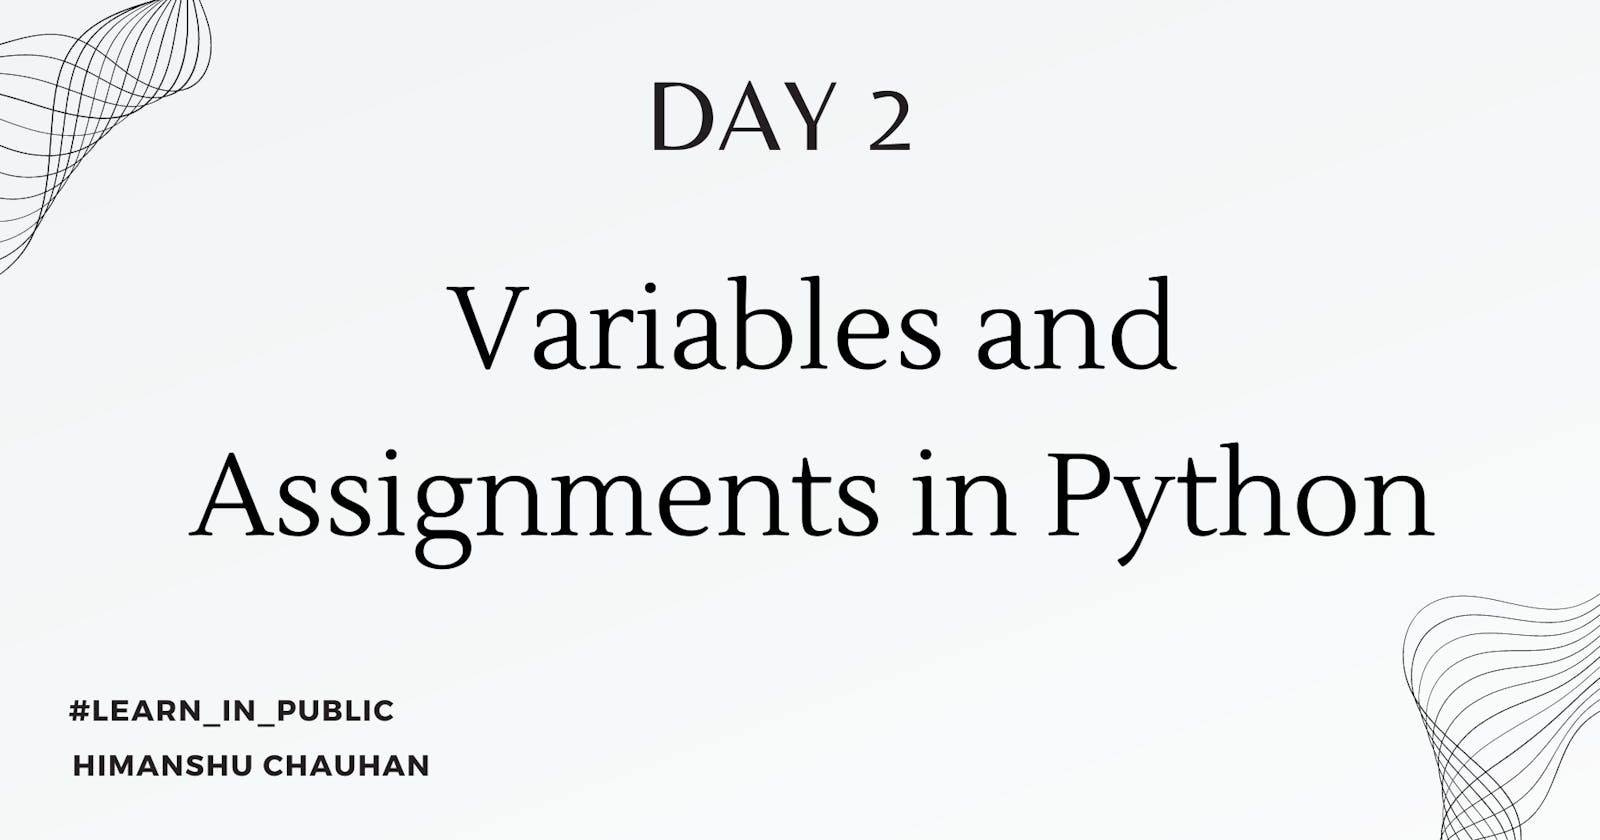 Day 2: Variables and Assignments in Python